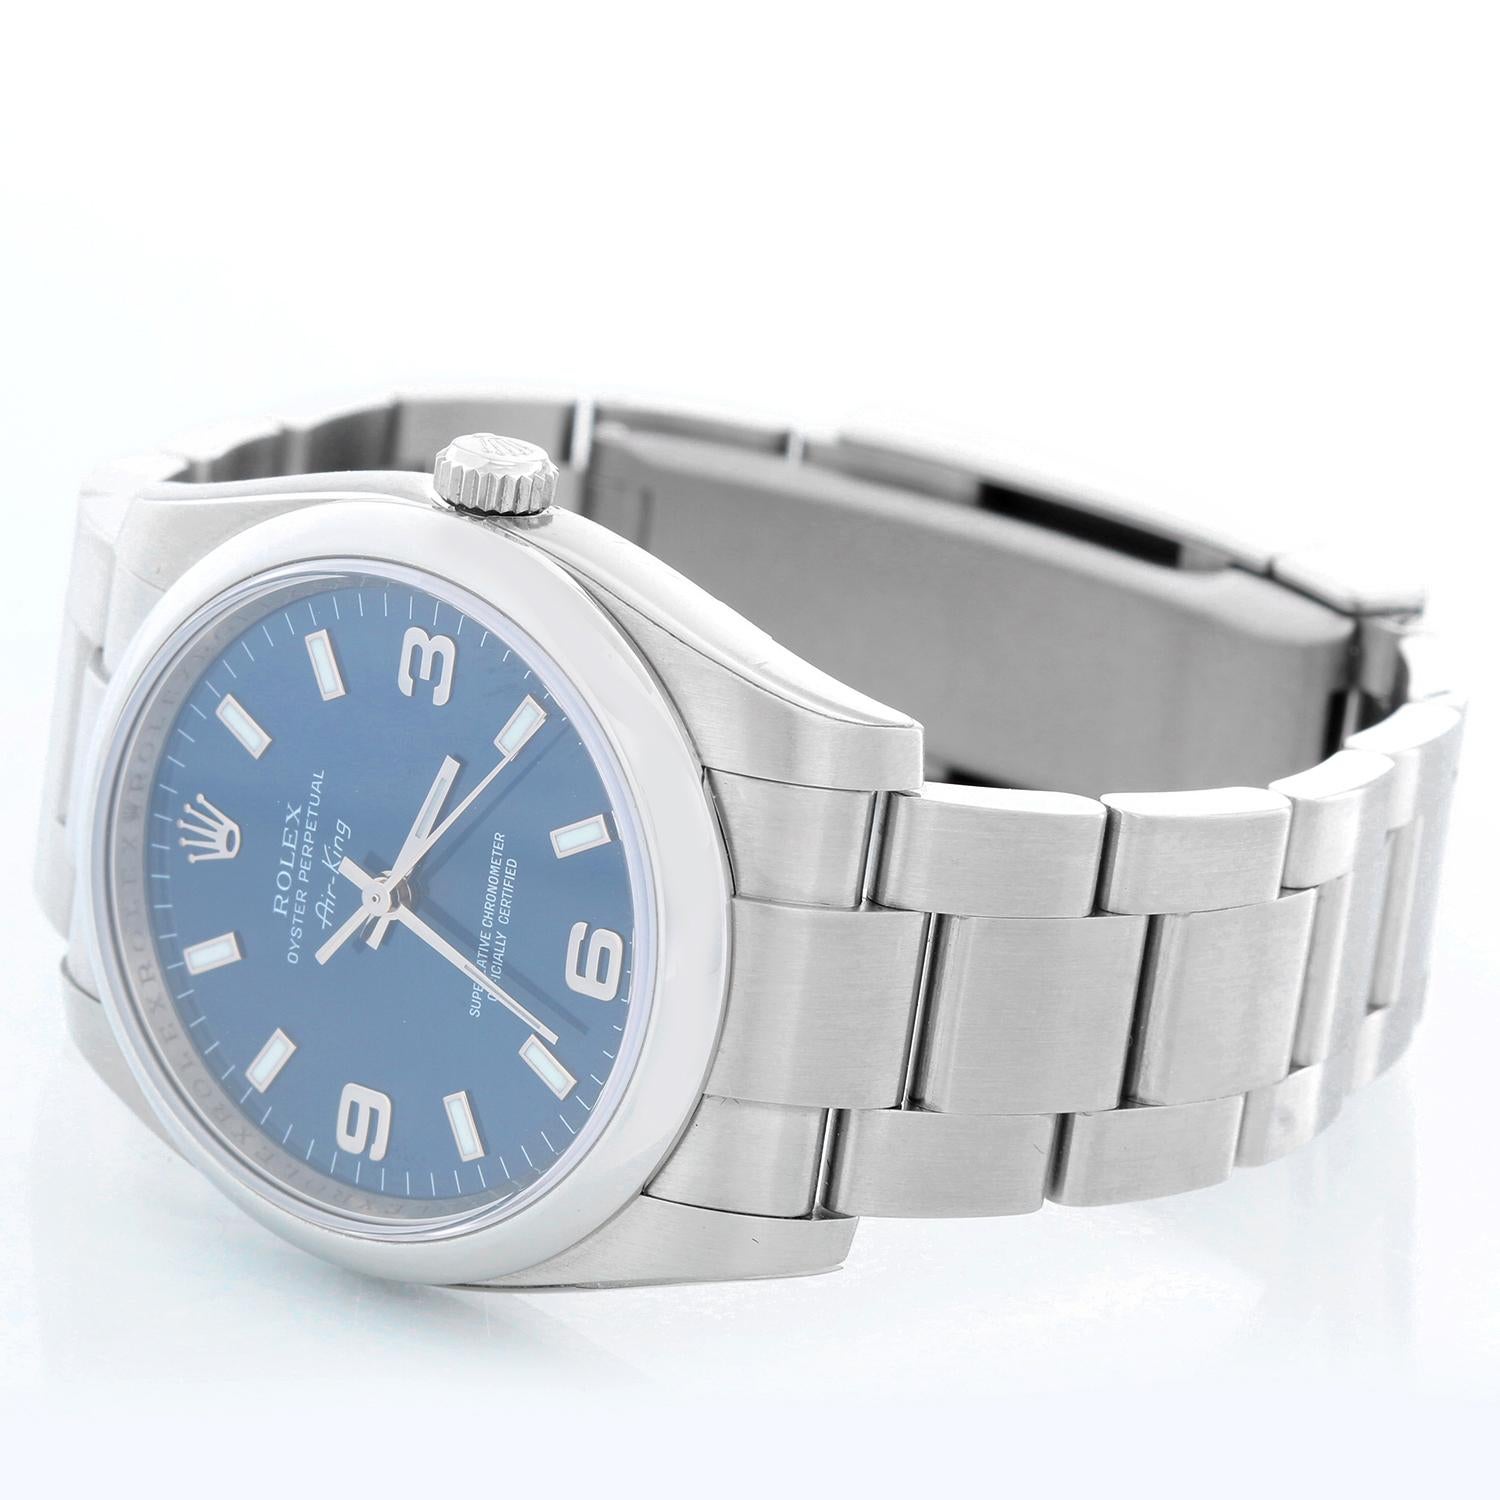 Automatic movement, 31 jewels, sapphire crystal. Stainless steel case with stainless steel smooth bezel (34mm diameter). Blue dial with Arabic numerals and luminous baton indexes. Stainless steel Oyster bracelet. Pre-owned with custom box 